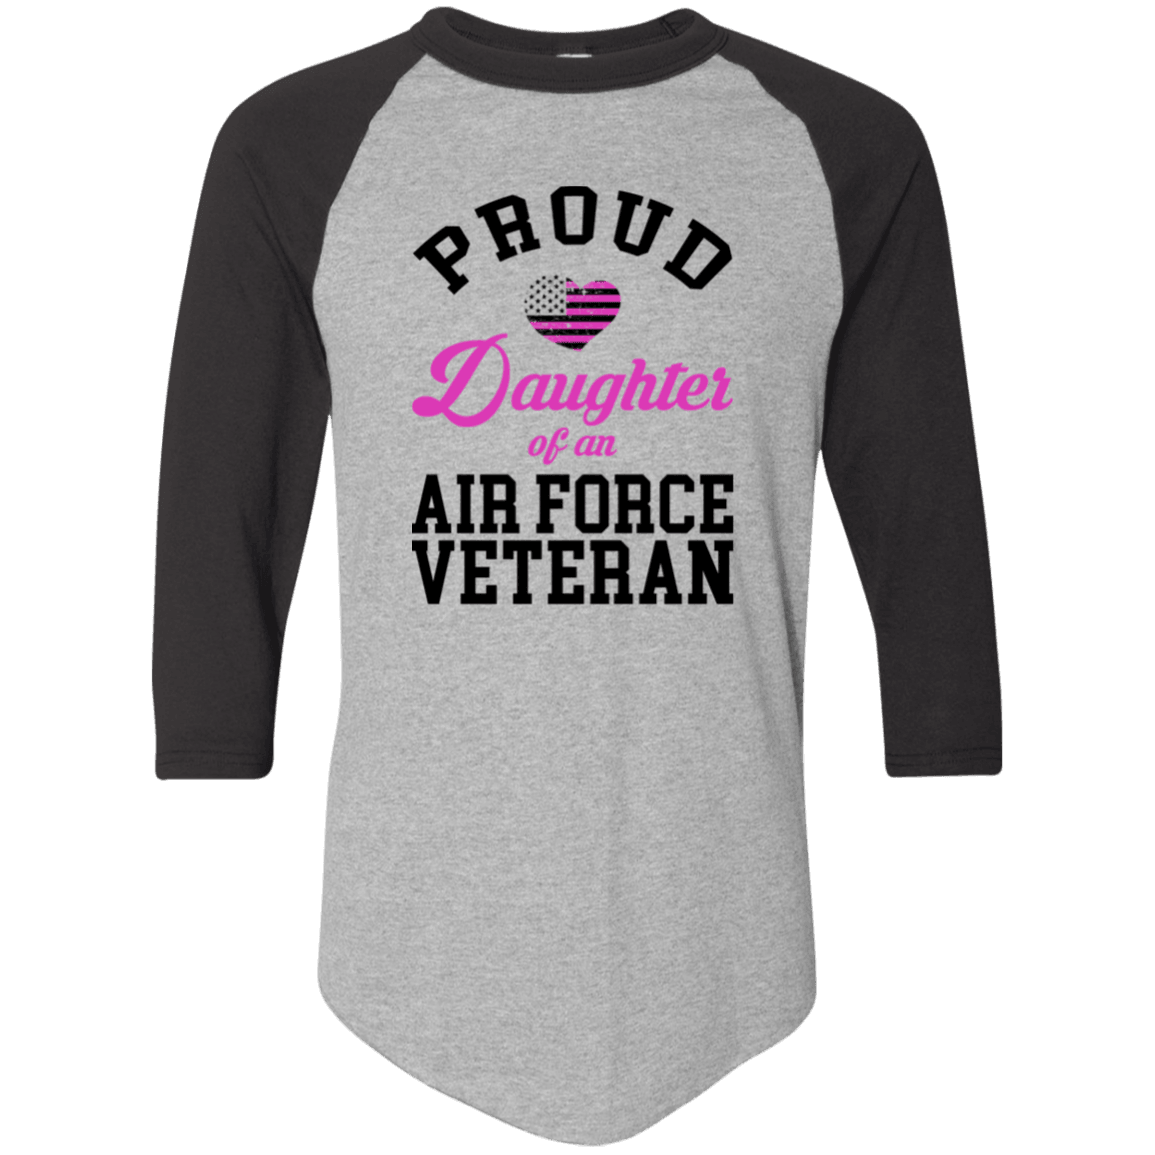 Designs by MyUtopia Shout Out:Proud Daughter of an Air Force Veteran 3/4 Length Sleeve Color block Raglan Jersey T-Shirt,Athletic Heather/Black / S,T-Shirts